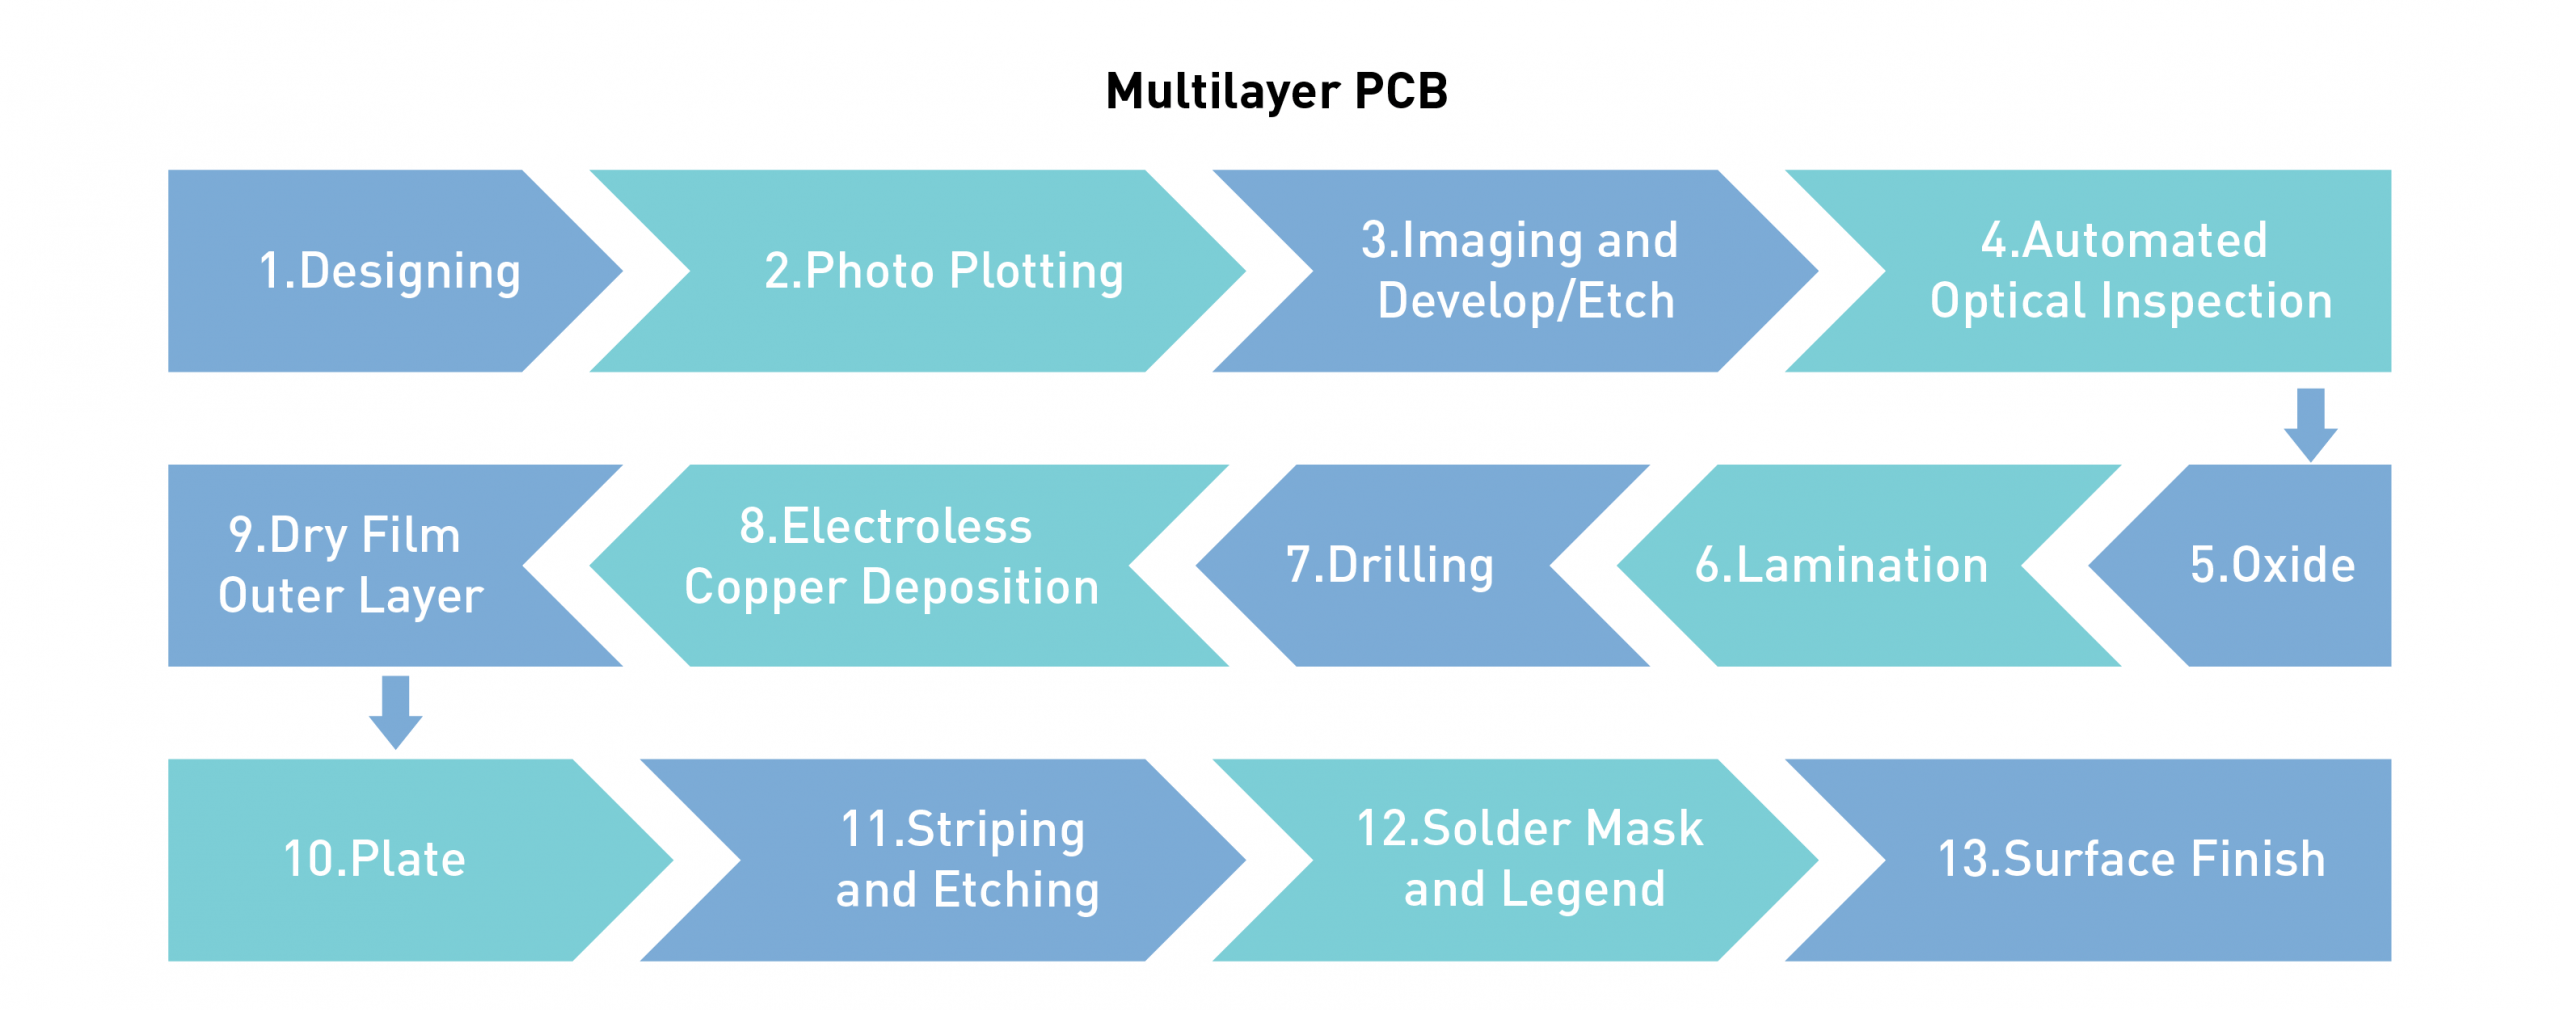 multilayer pcb manufacturing process